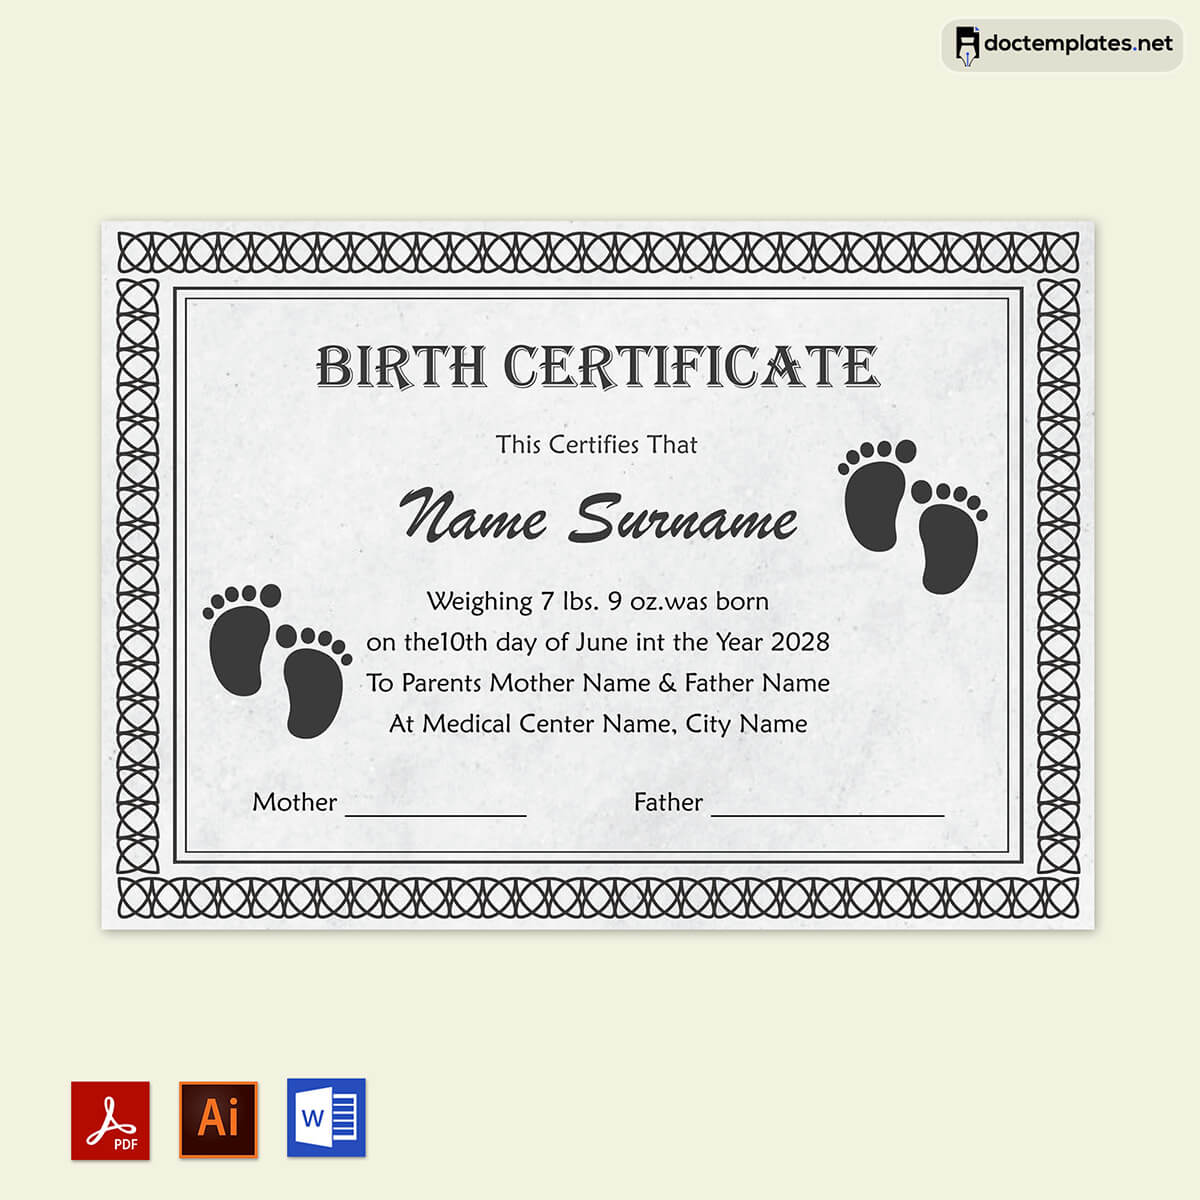 Image of Fillable birth certificate template
Fillable birth certificate template
01